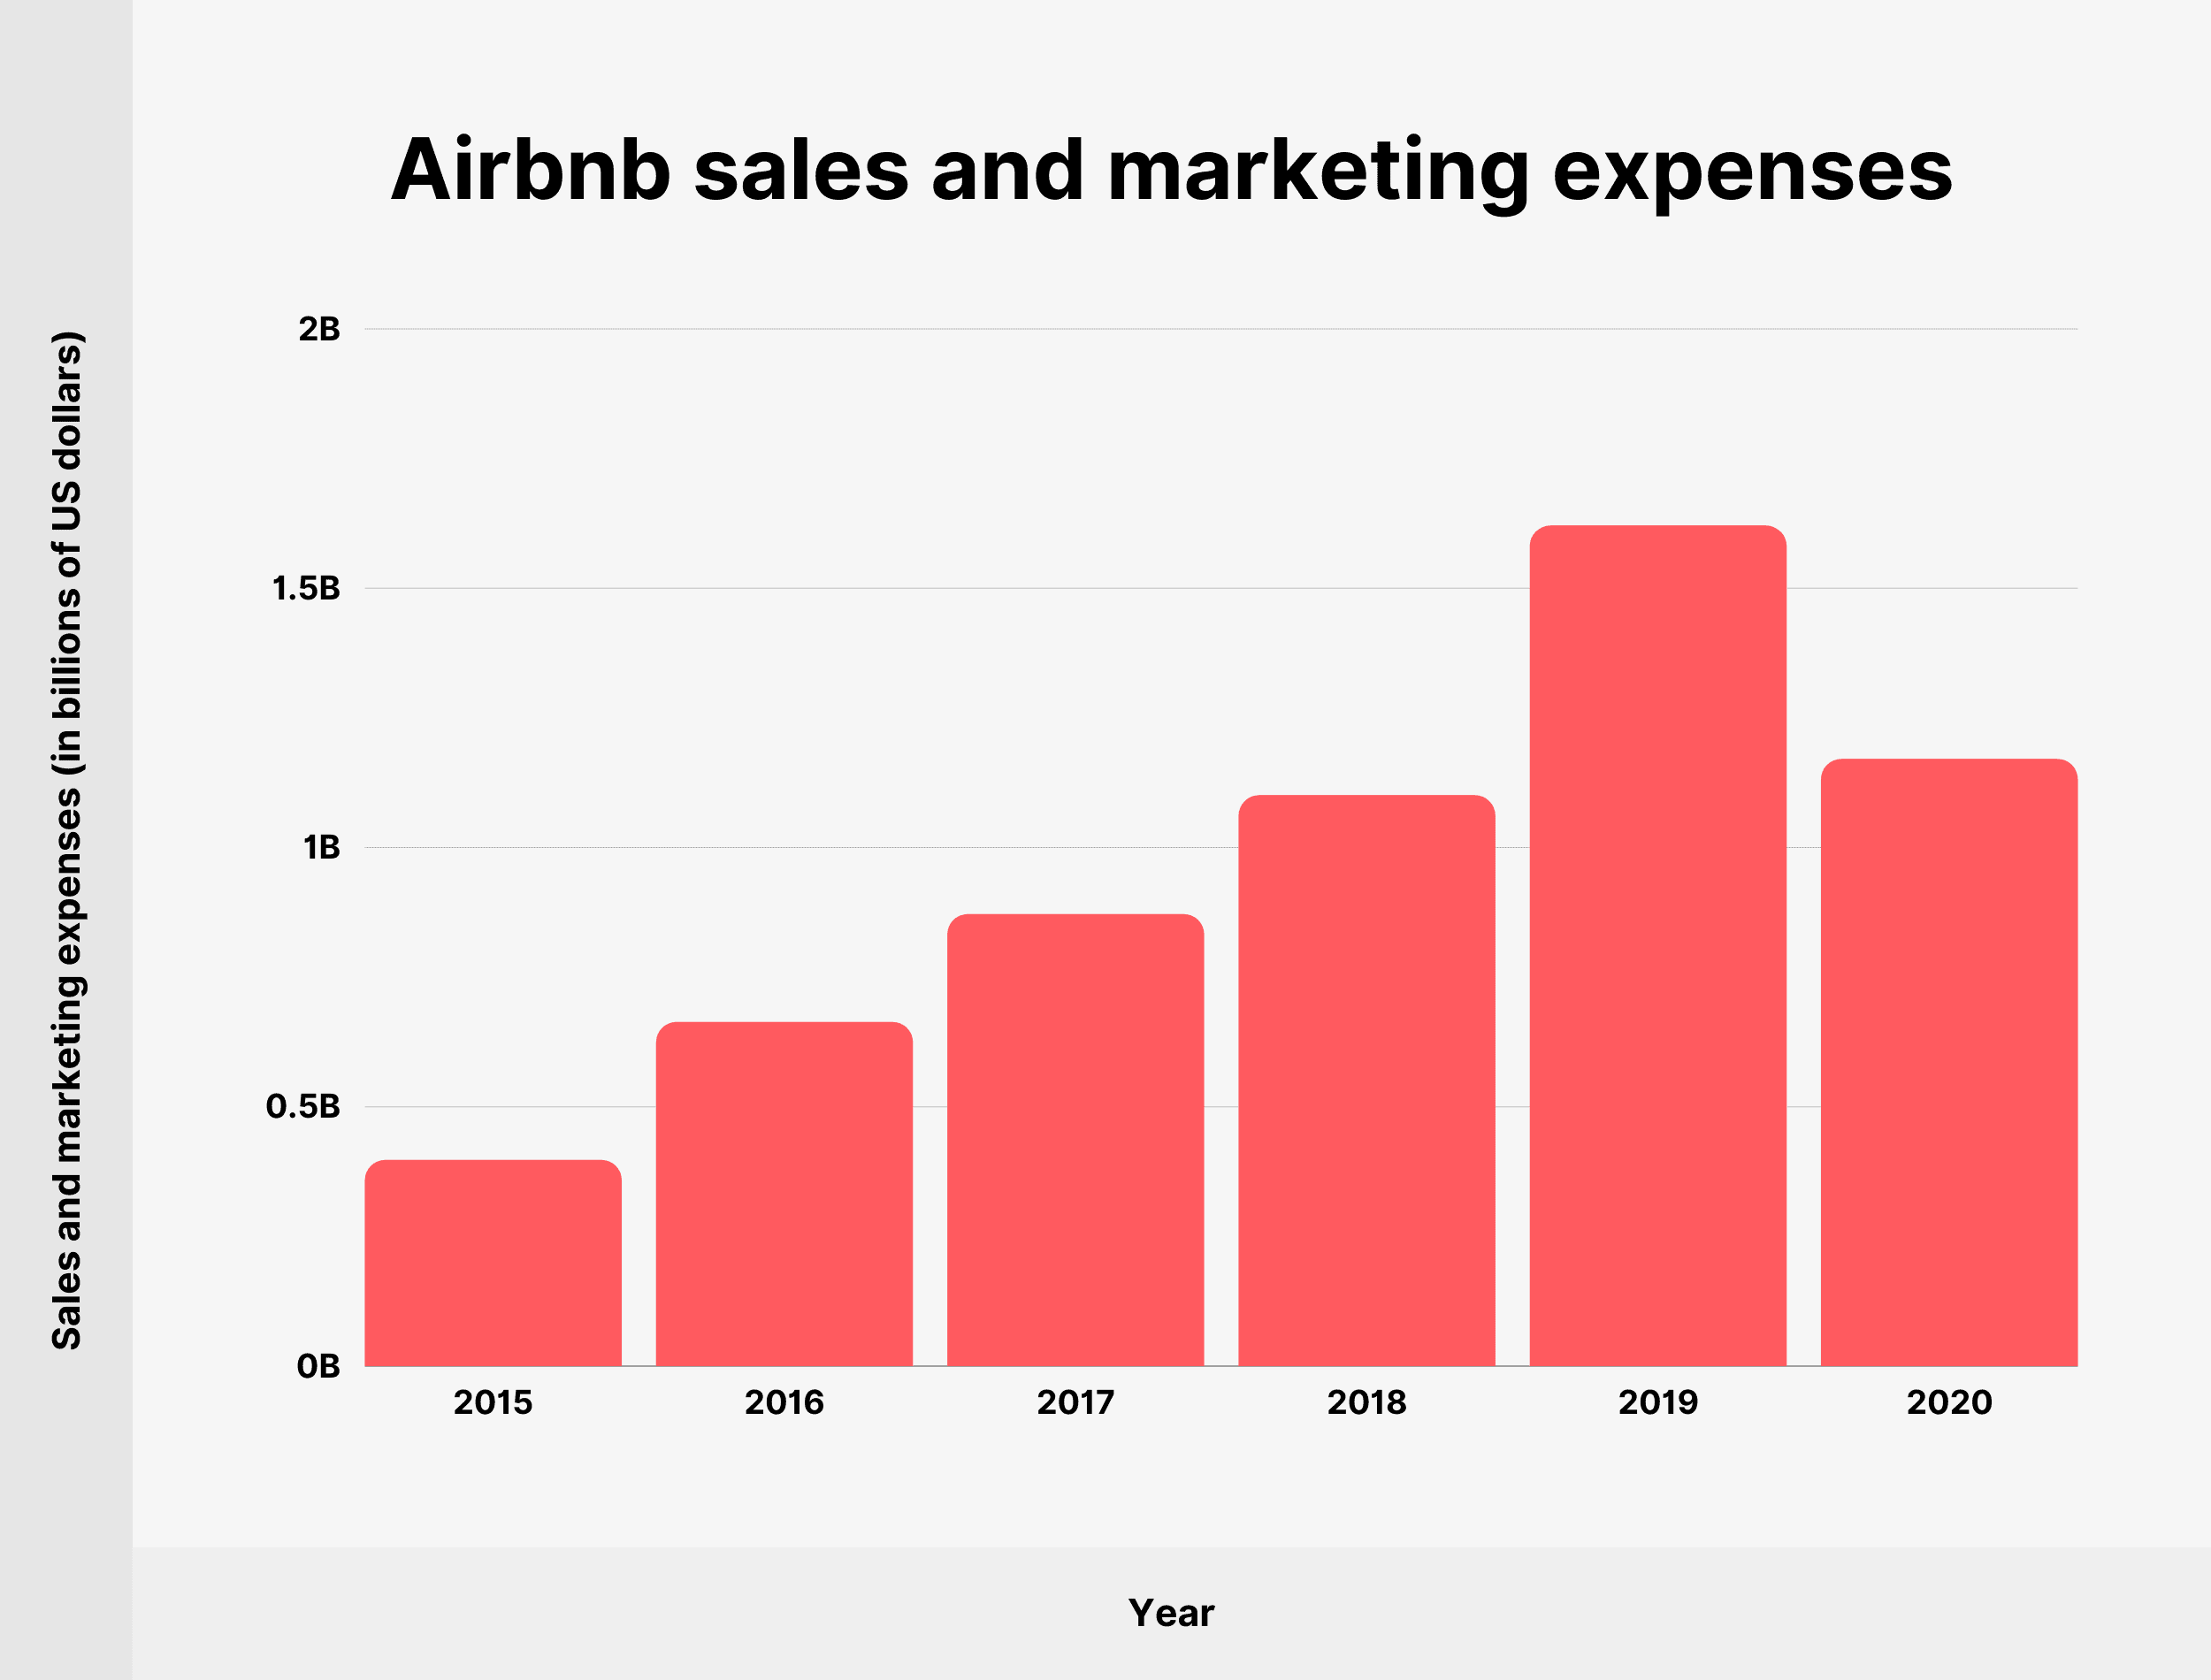 Airbnb sales and marketing expenses